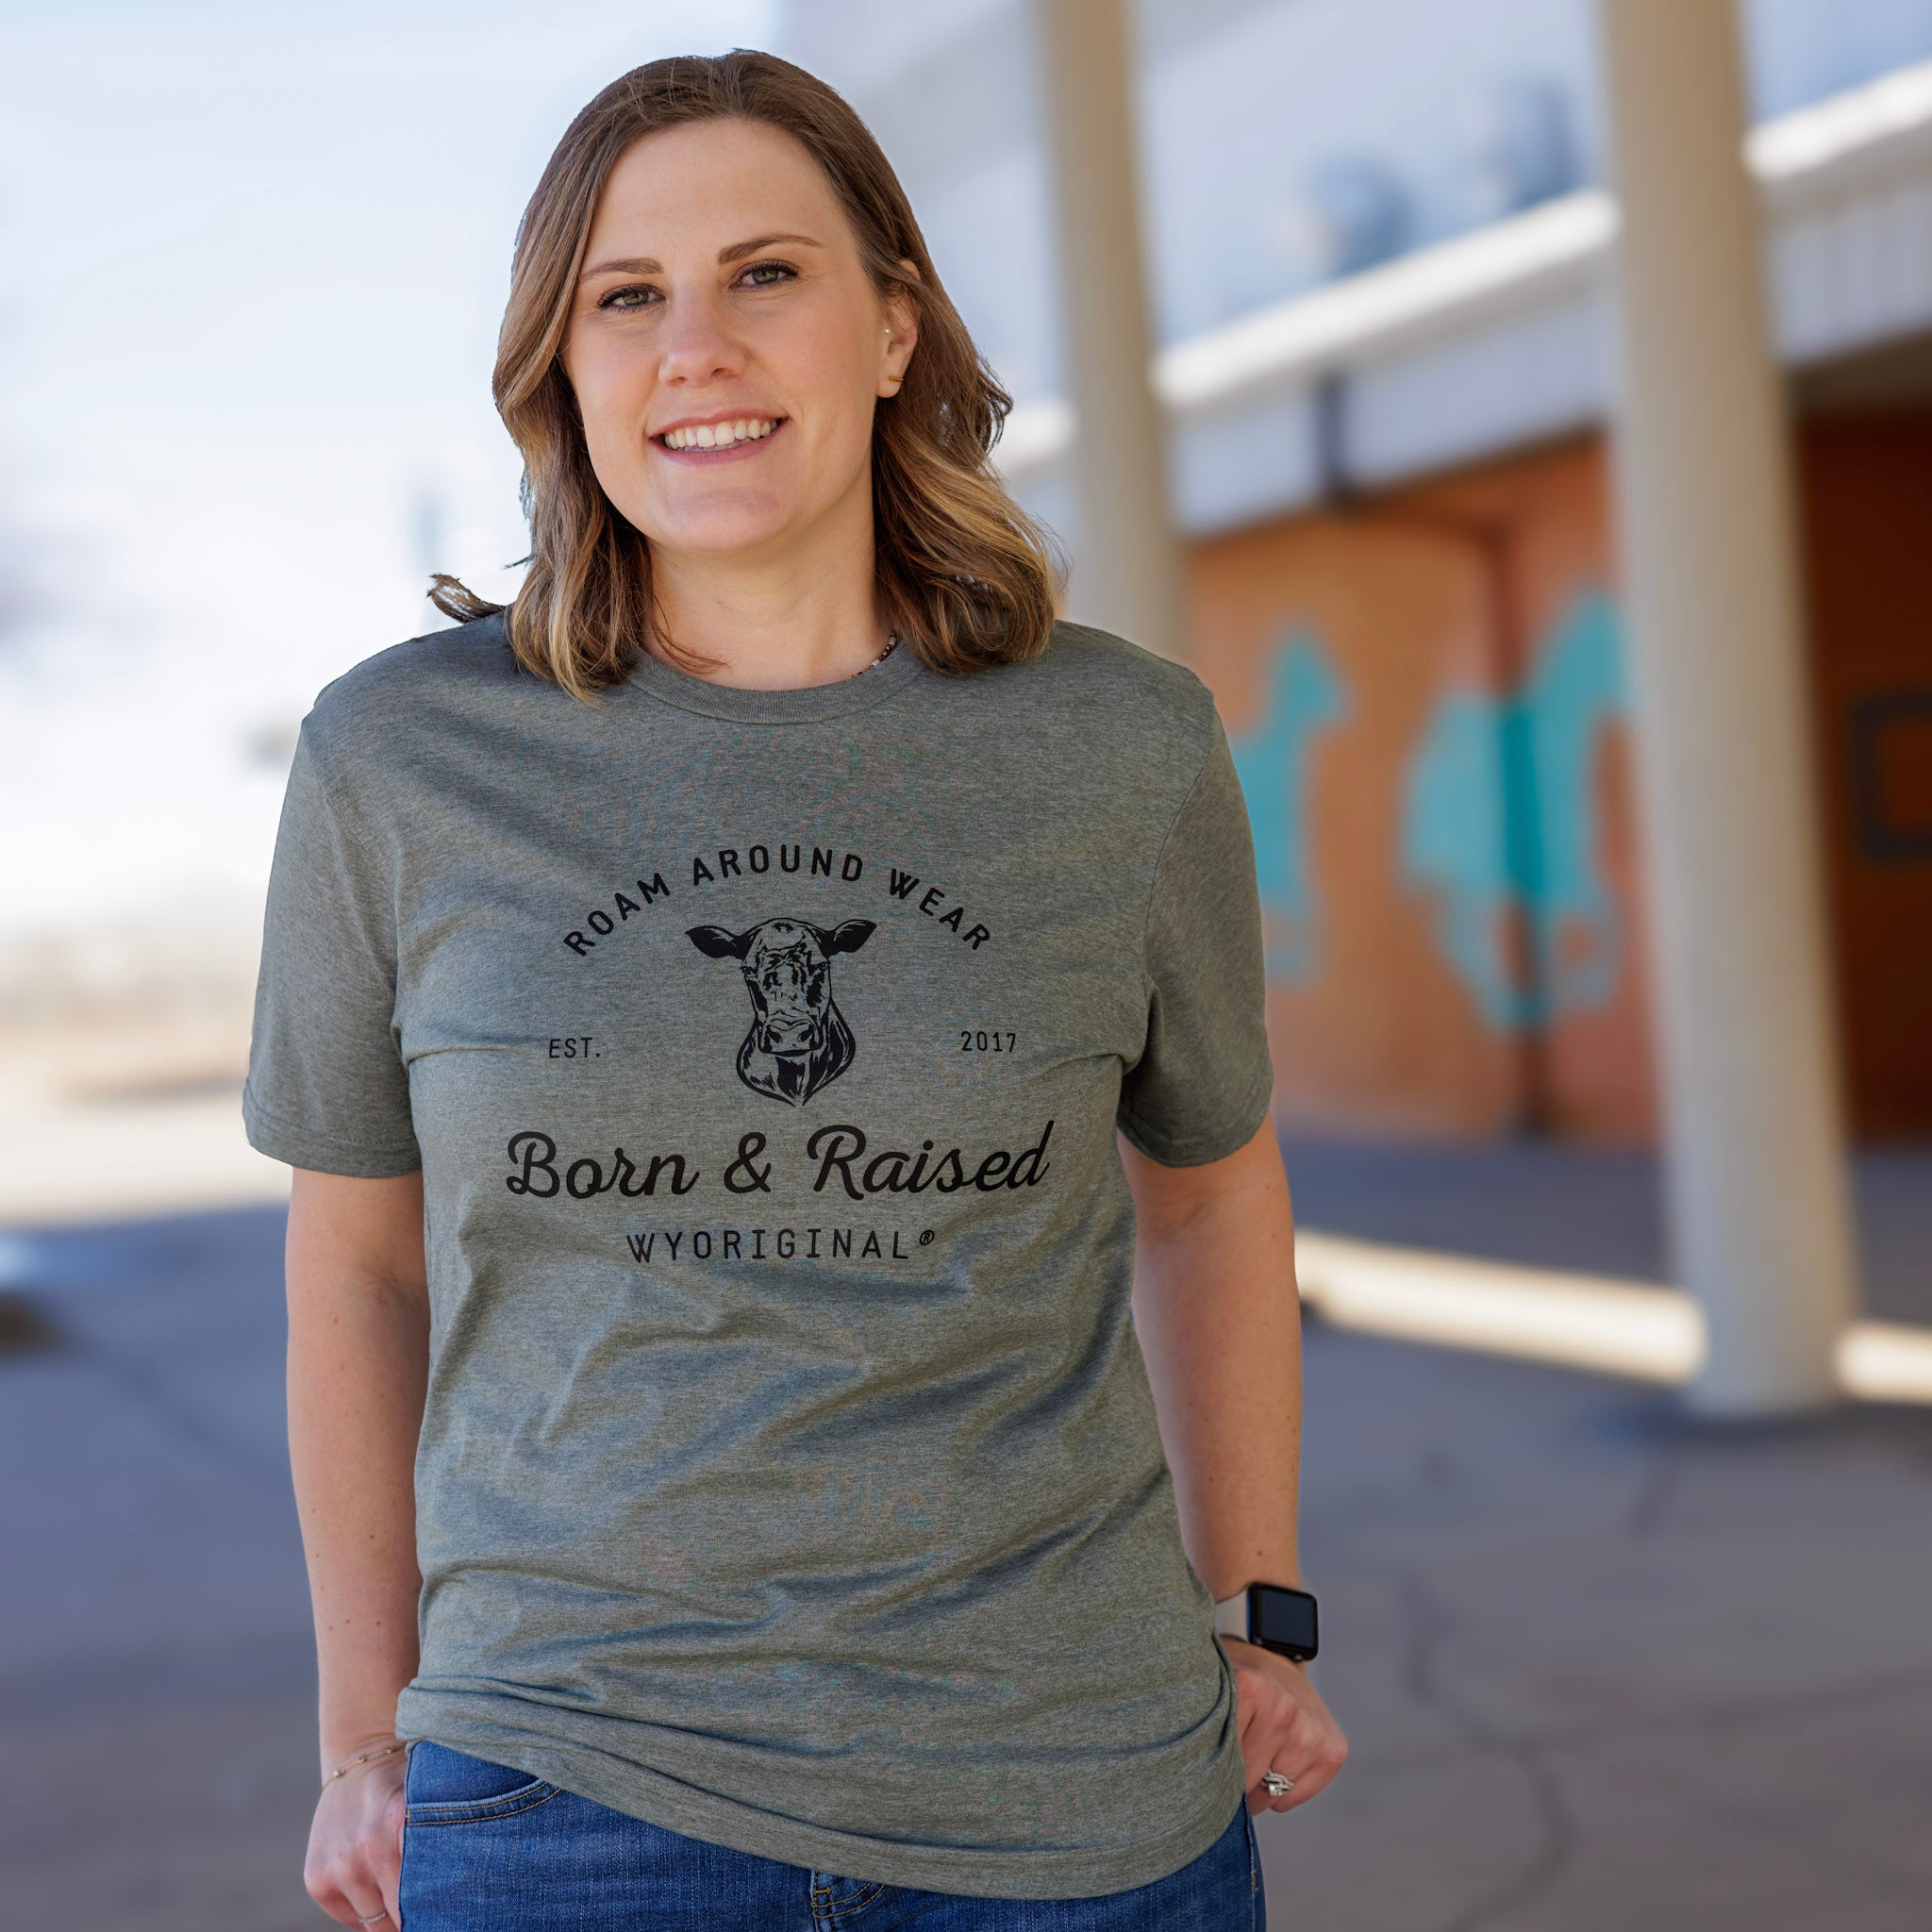 Wyoriginal Born and Raised cow tee. Unisex tee. Green wyoming tee. Ranch tee. Roam Around Wear is a Wyoming t-shirt company based in Gillette, Wyoming